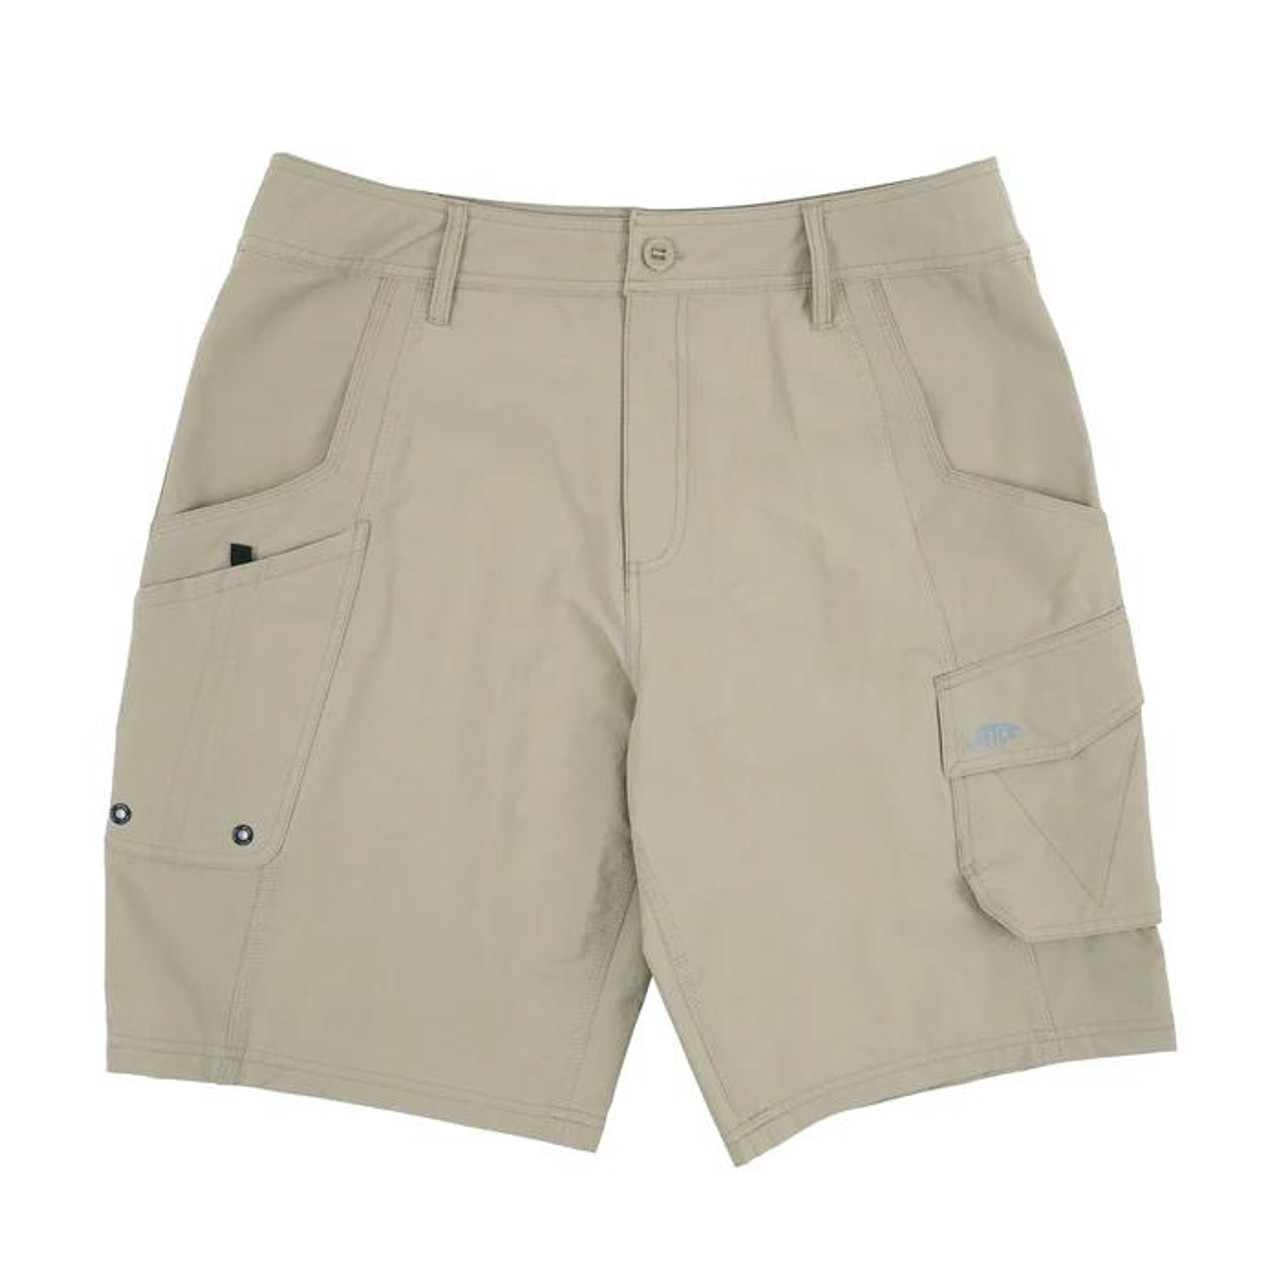 Aftco Men's Stealth Fishing Shorts - Khaki - Dance's Sporting Goods